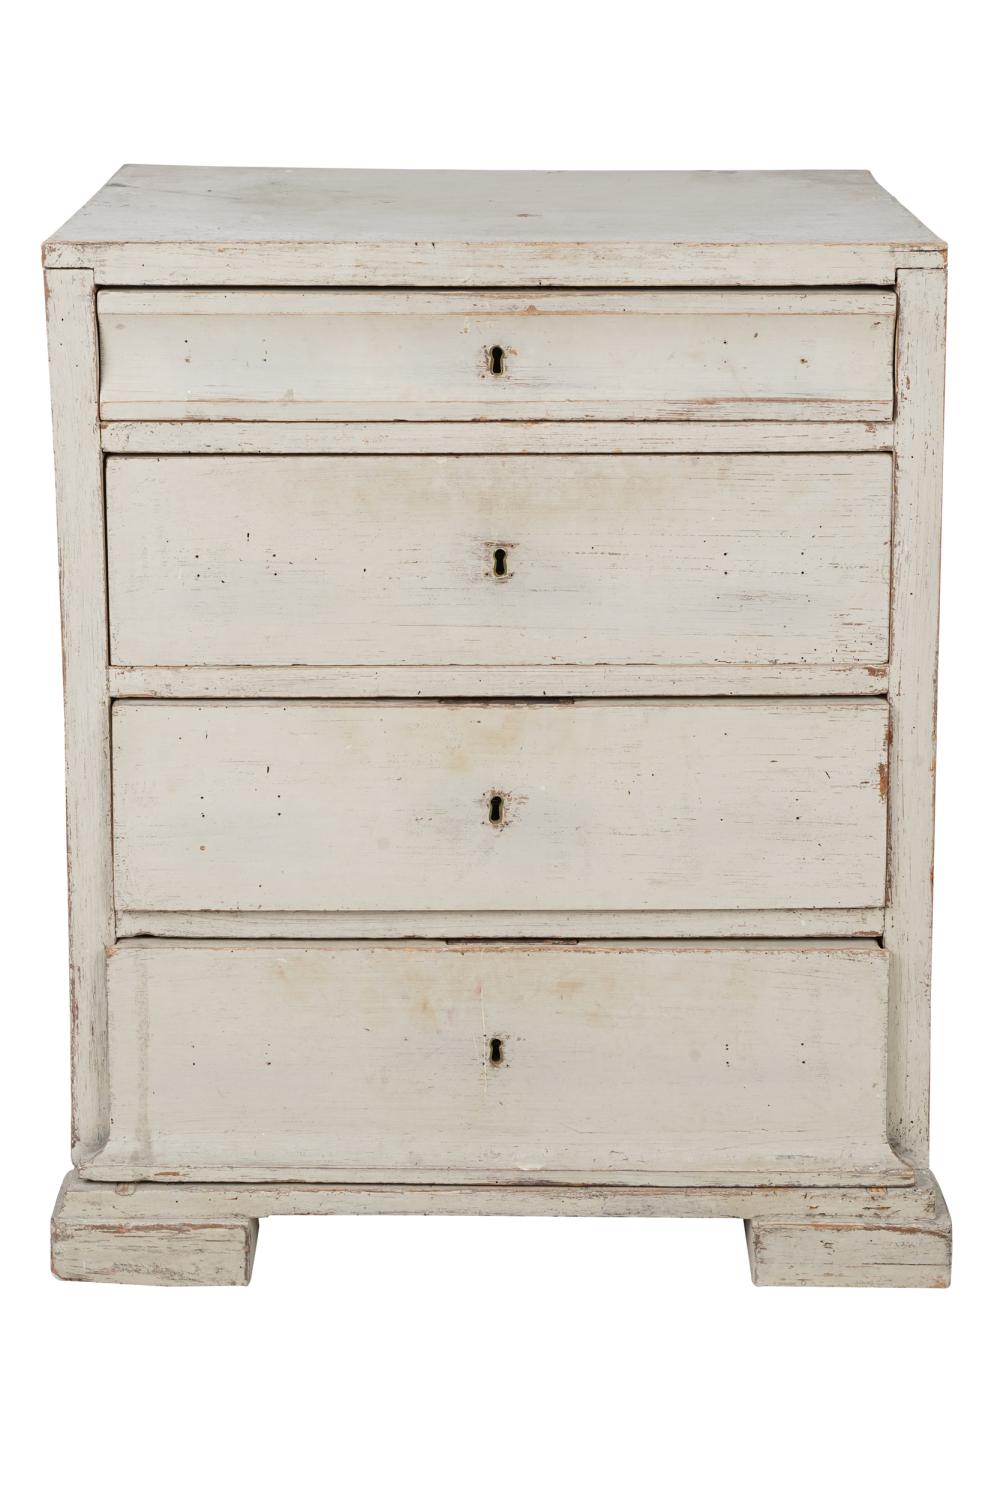 GUSTAVIAN GREY PAINTED CHEST OF 333c66